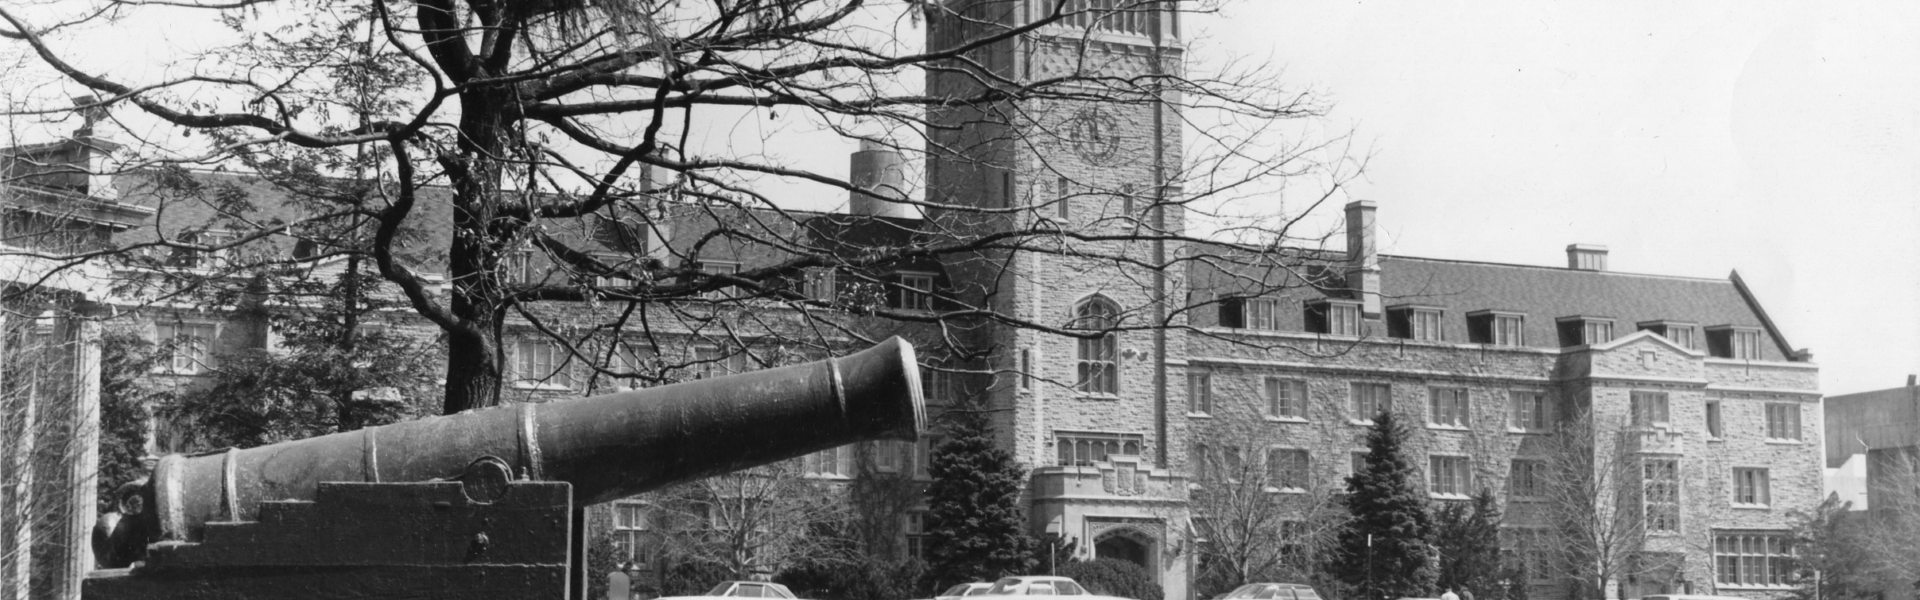 An old black and white photo of the U of G cannon in front of Johnston Hall.